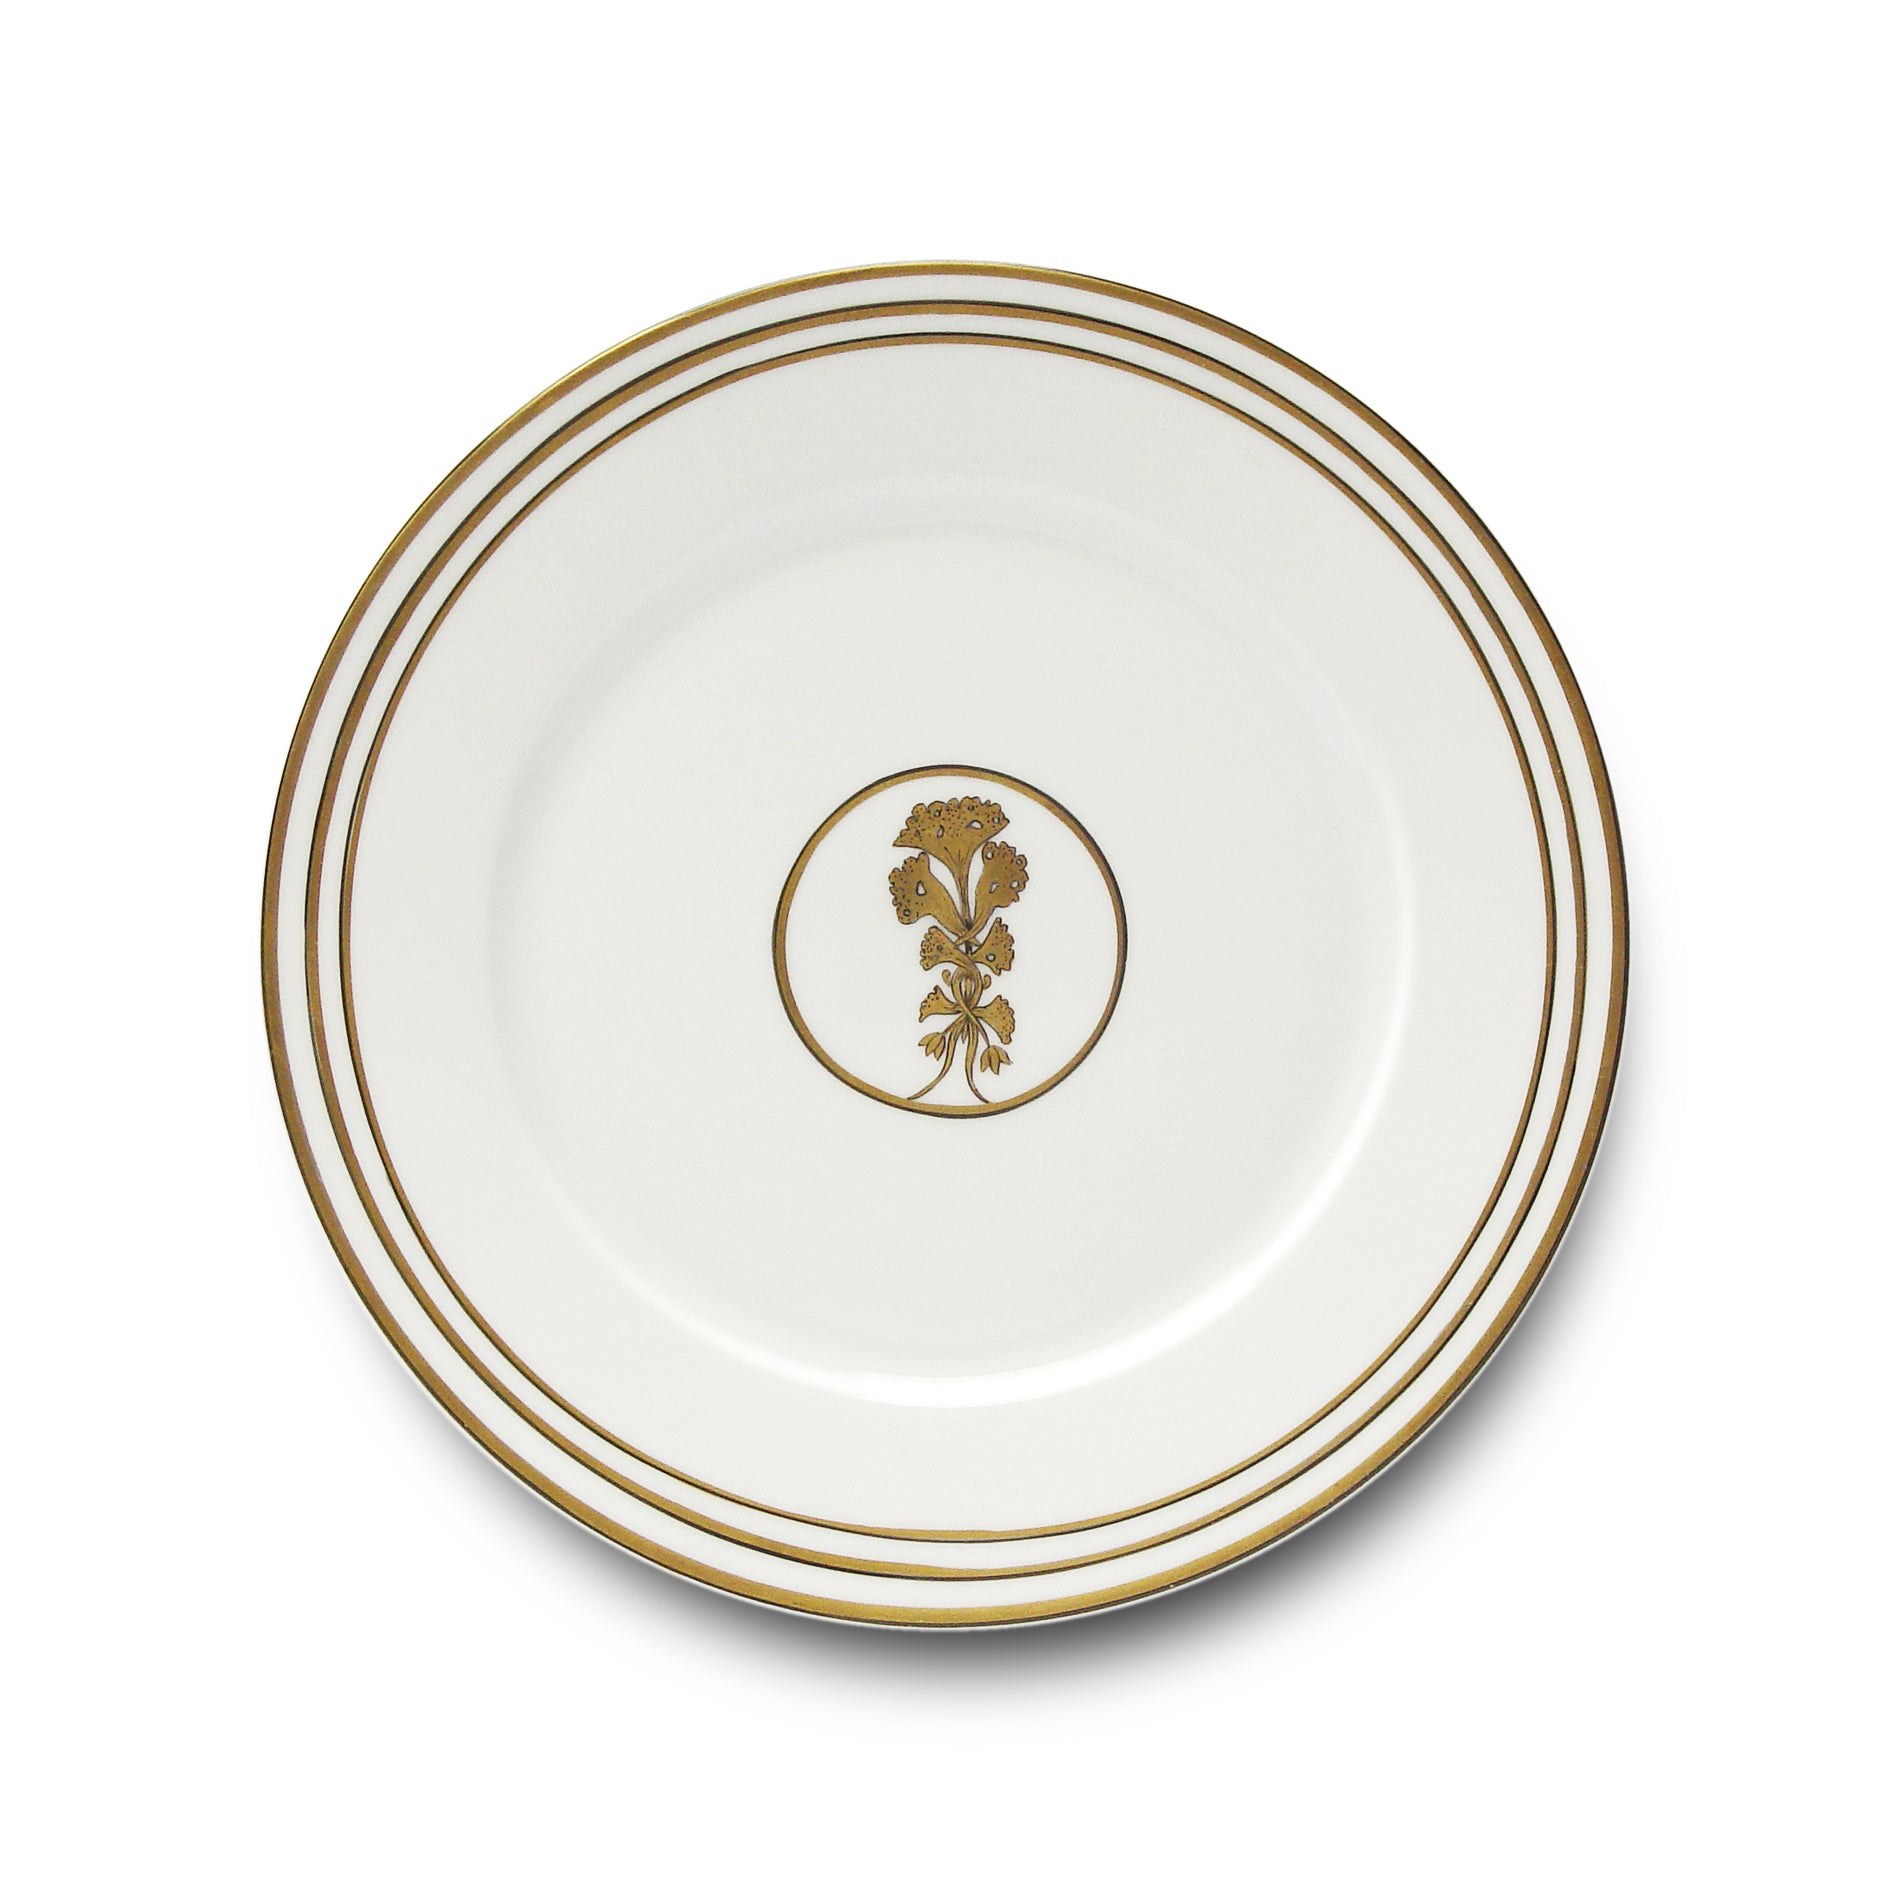 Or des Airs - Or des Mers - Assiette plate 02